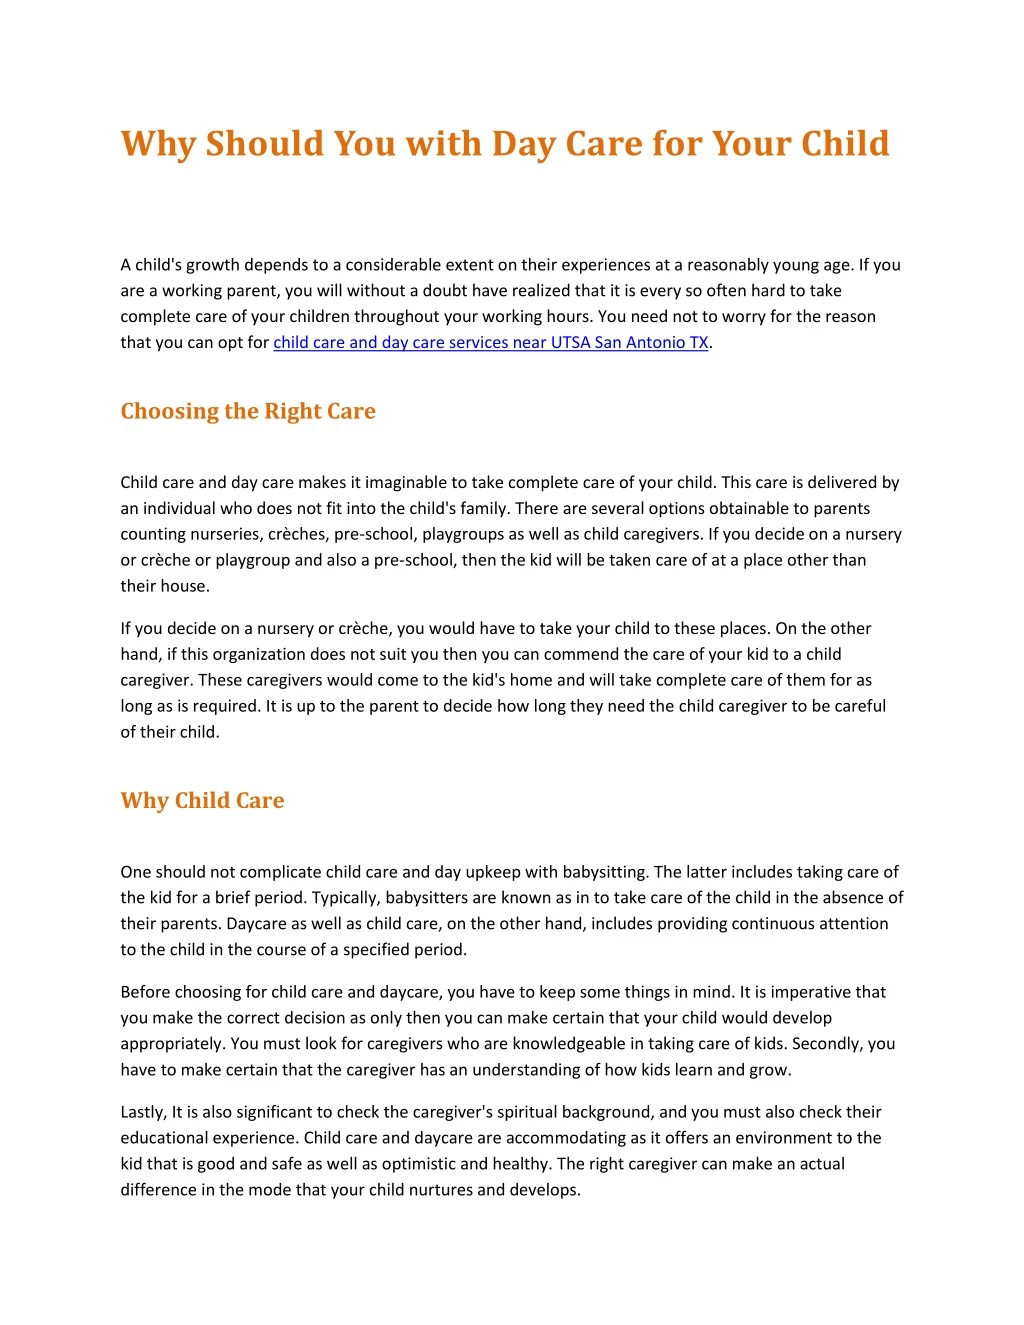 why should you with day care for your child